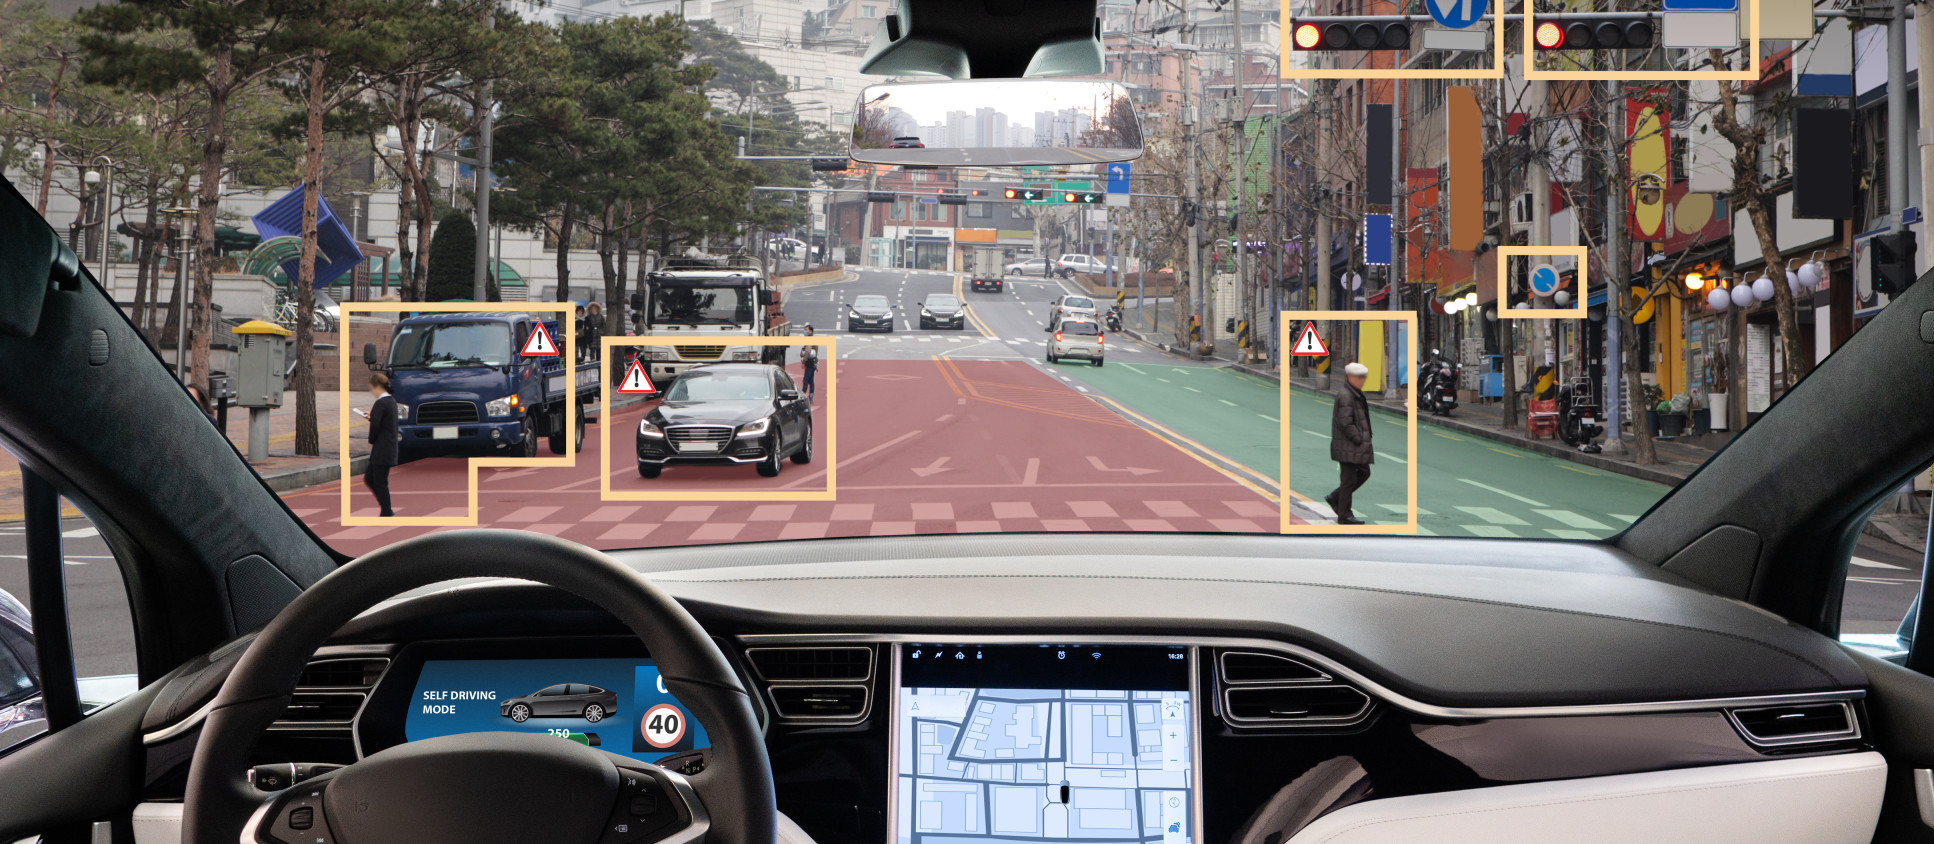 Photo from inside a driverless car looking out of the windscreen. Objects in the distance are highlighted